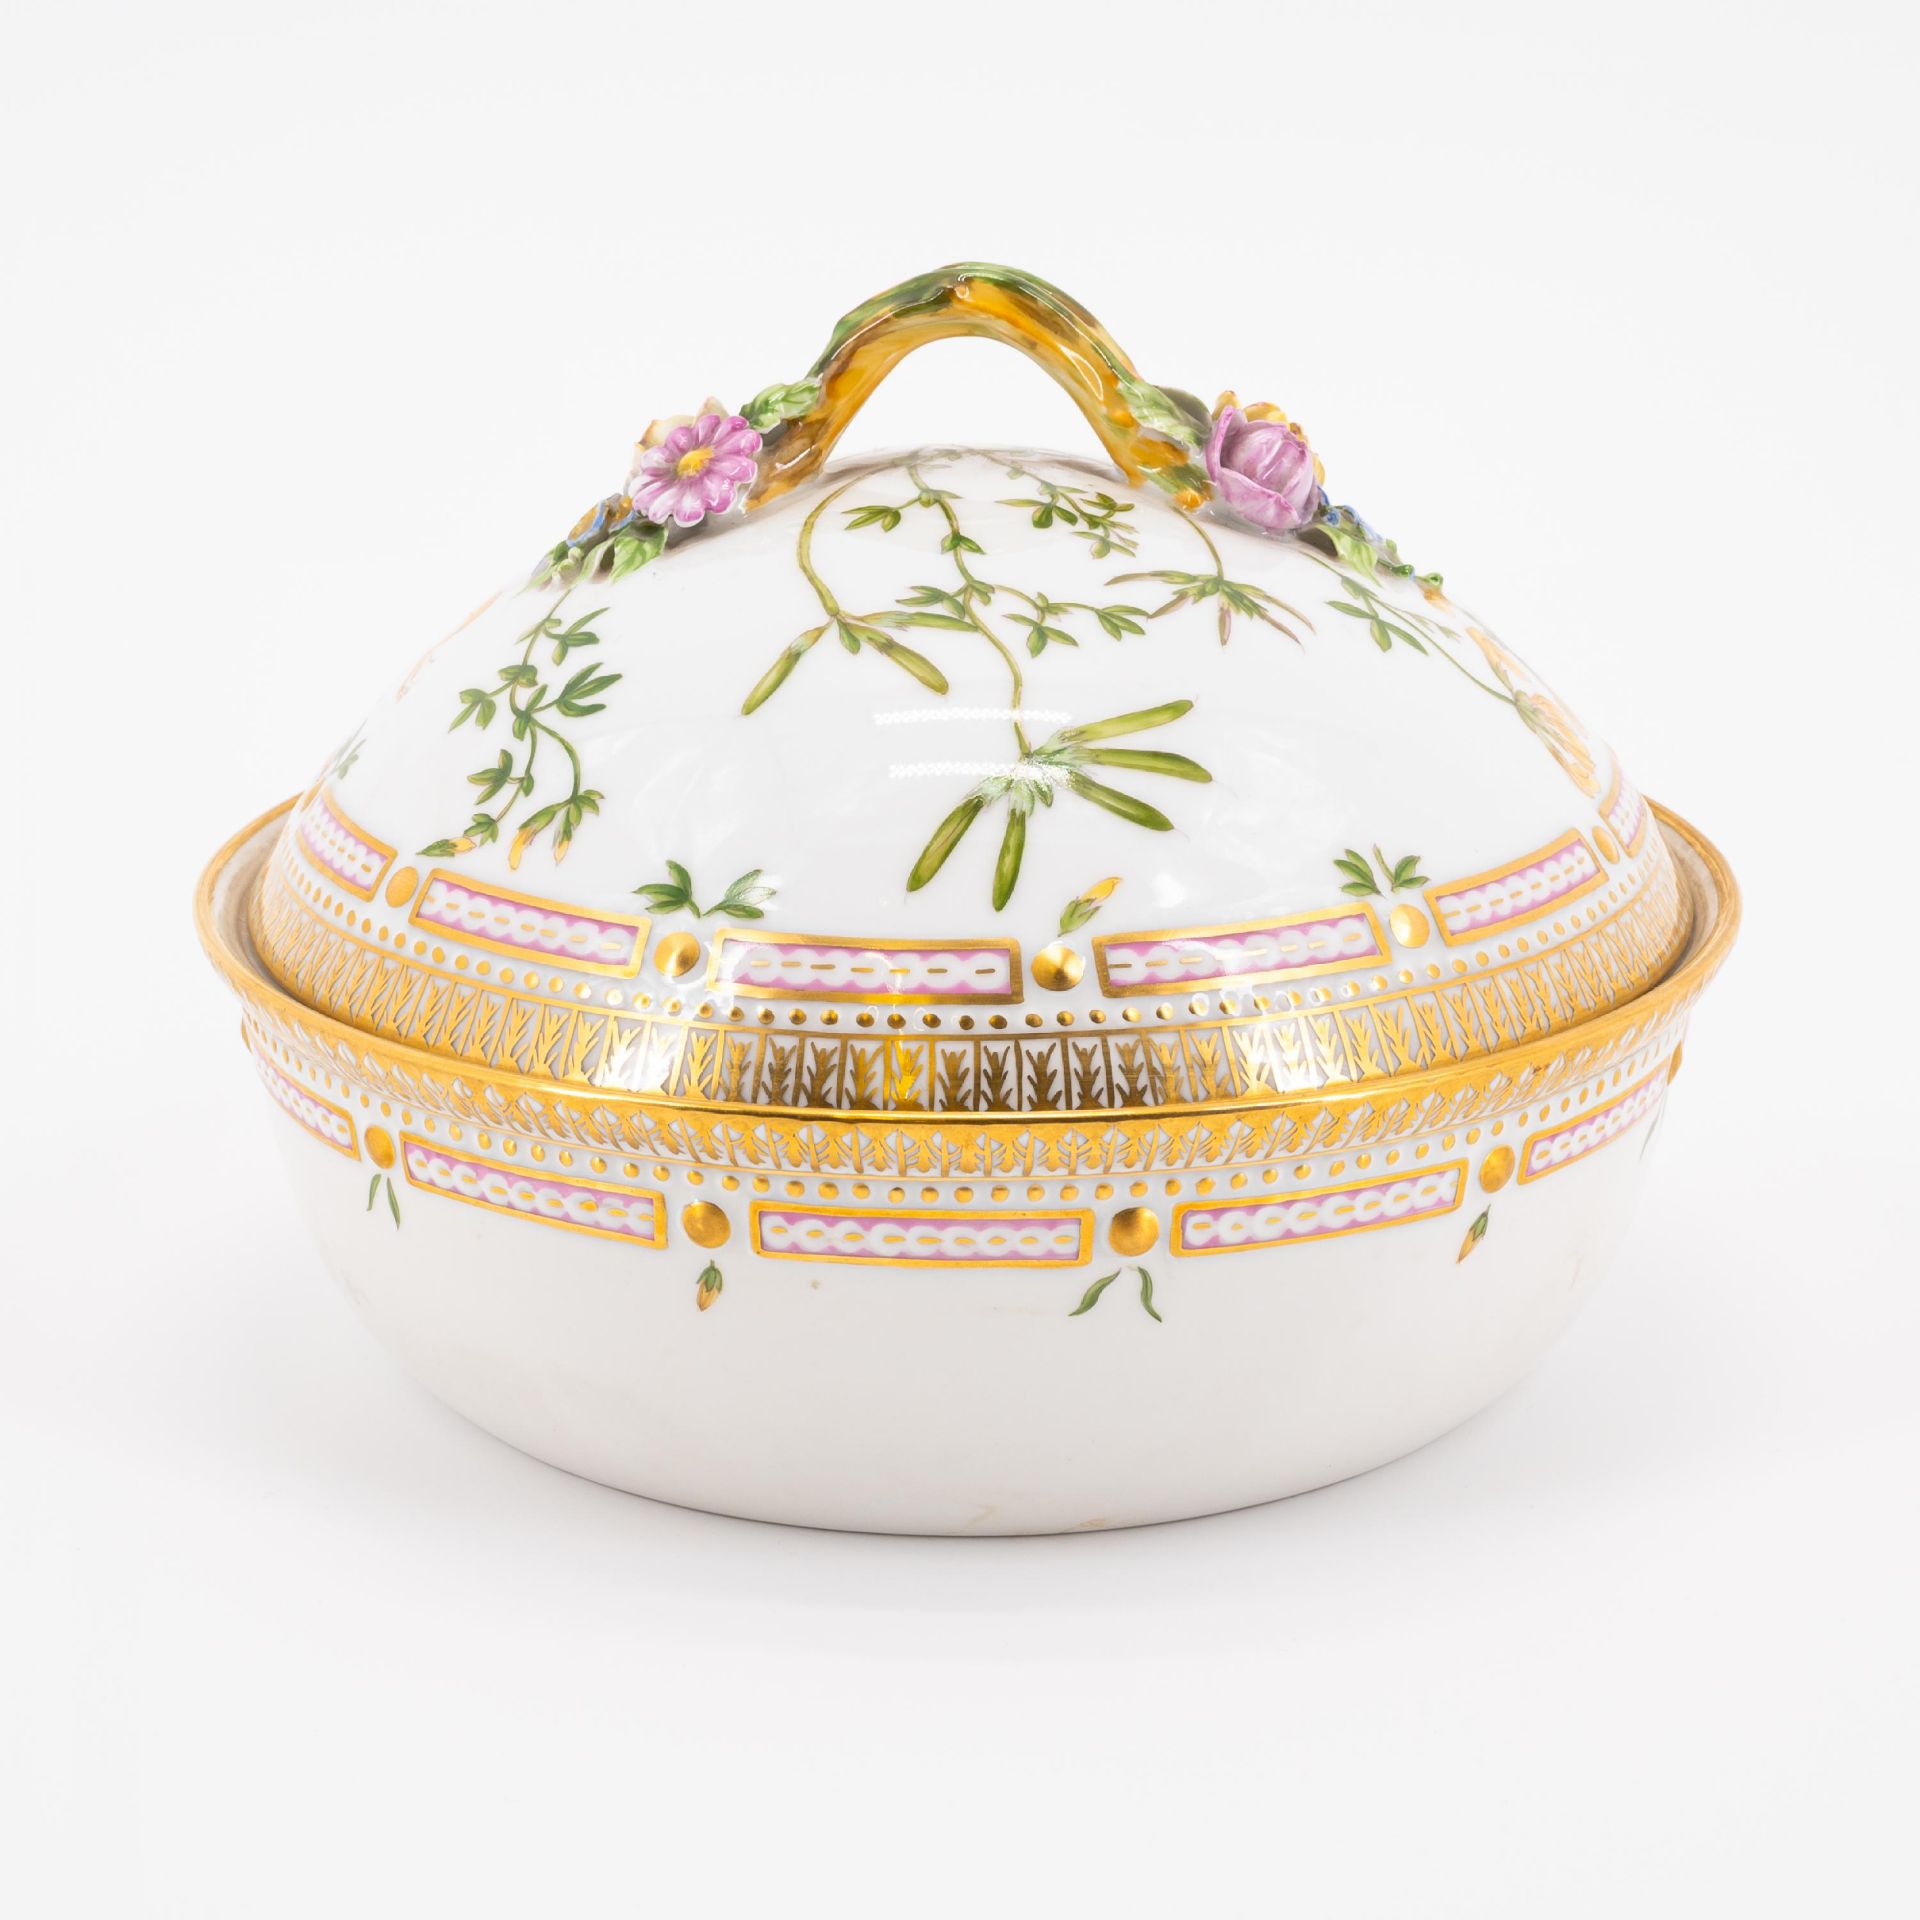 18 PIECES FROM A PORCELAIN DINNER SERVICE 'FLORA DANICA' - Image 14 of 26